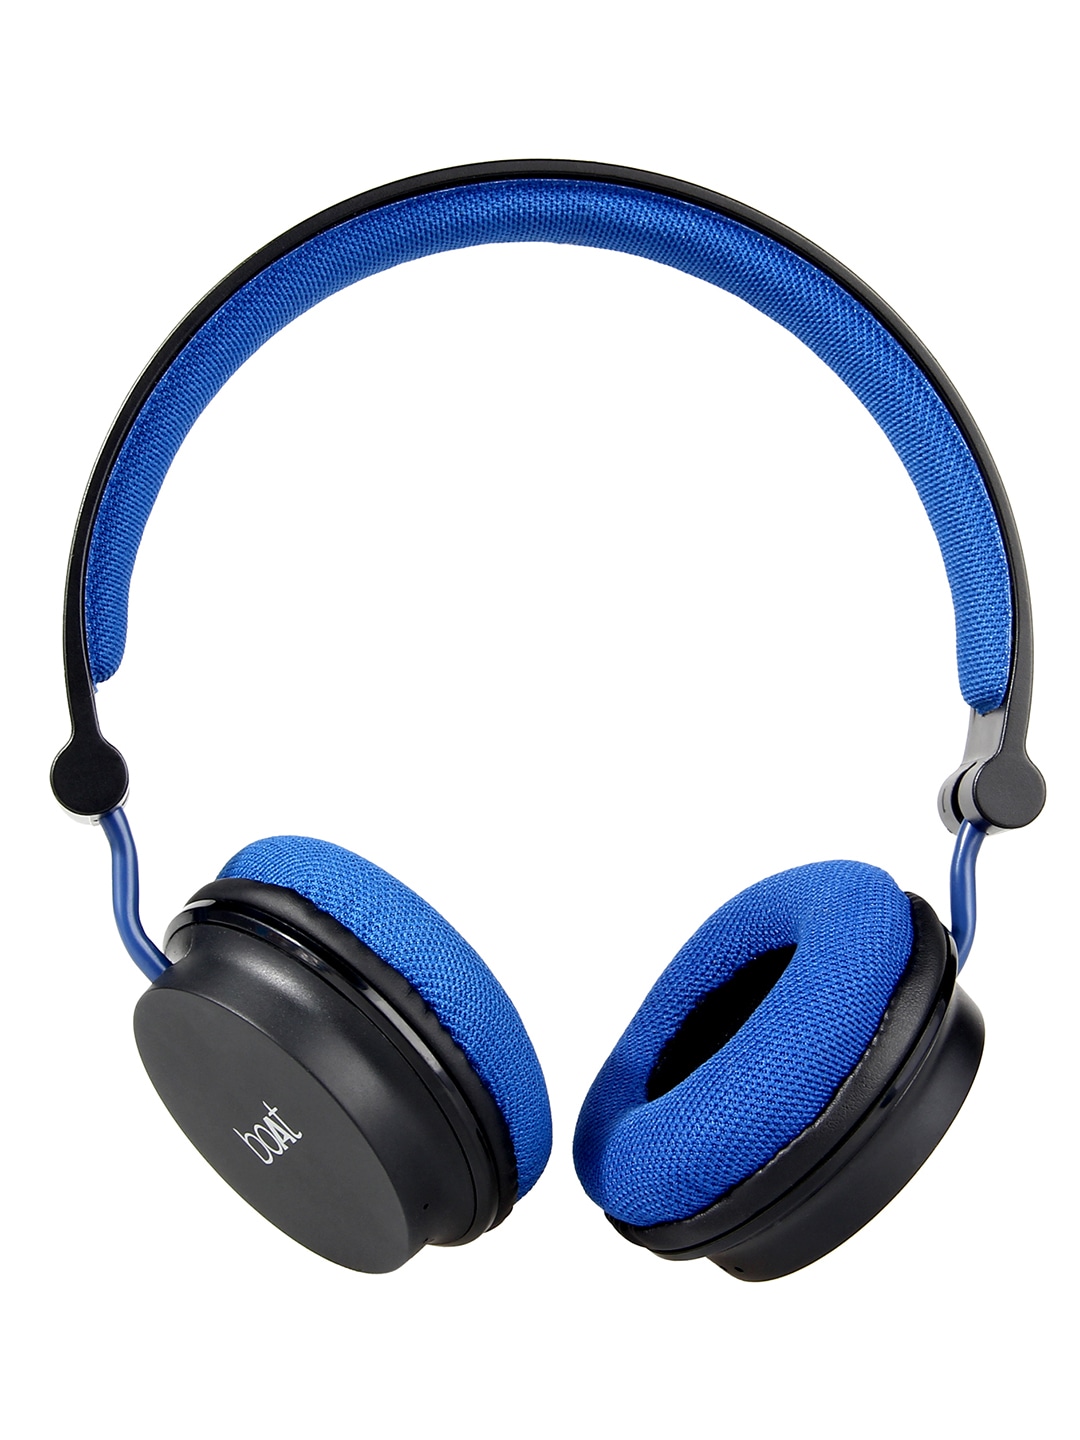 For 796/-(60% Off) boAt Unisex Black & Blue Rockerz 400 Wireless On Ear Bluetooth Headphones with Mic at Myntra